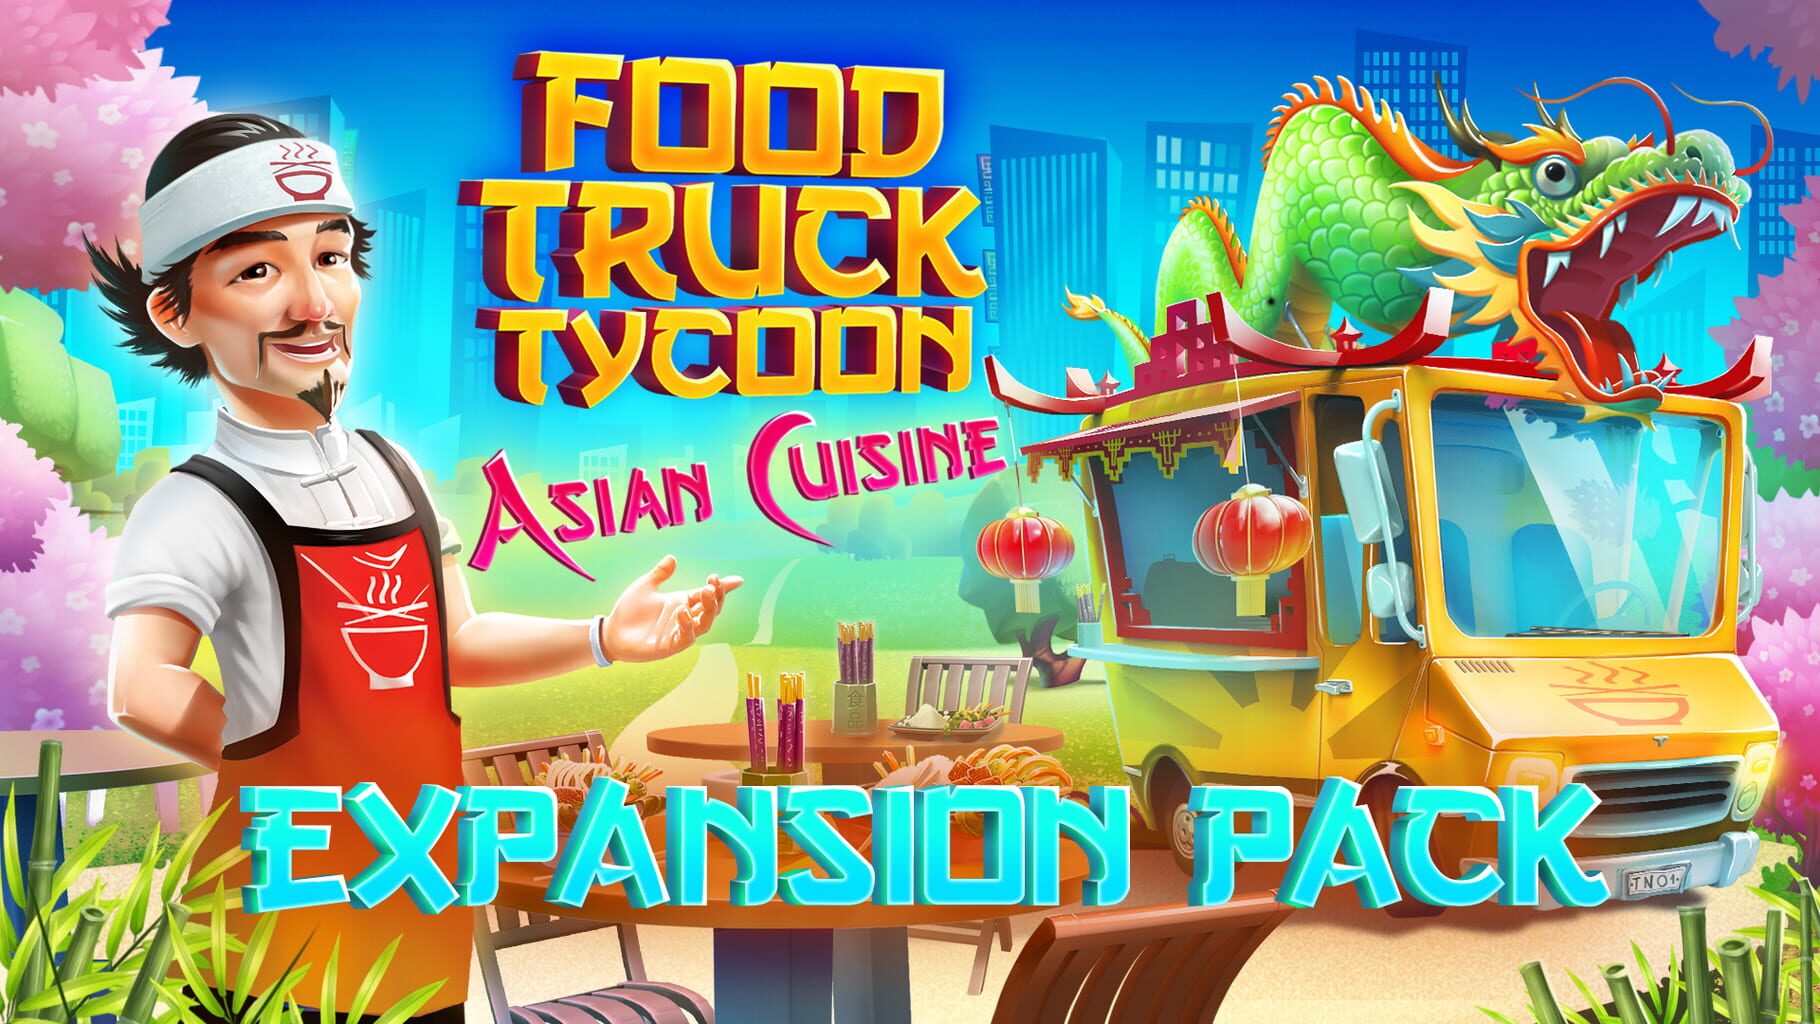 Food Truck Tycoon: Asian Cuisine - Expansion Pack artwork